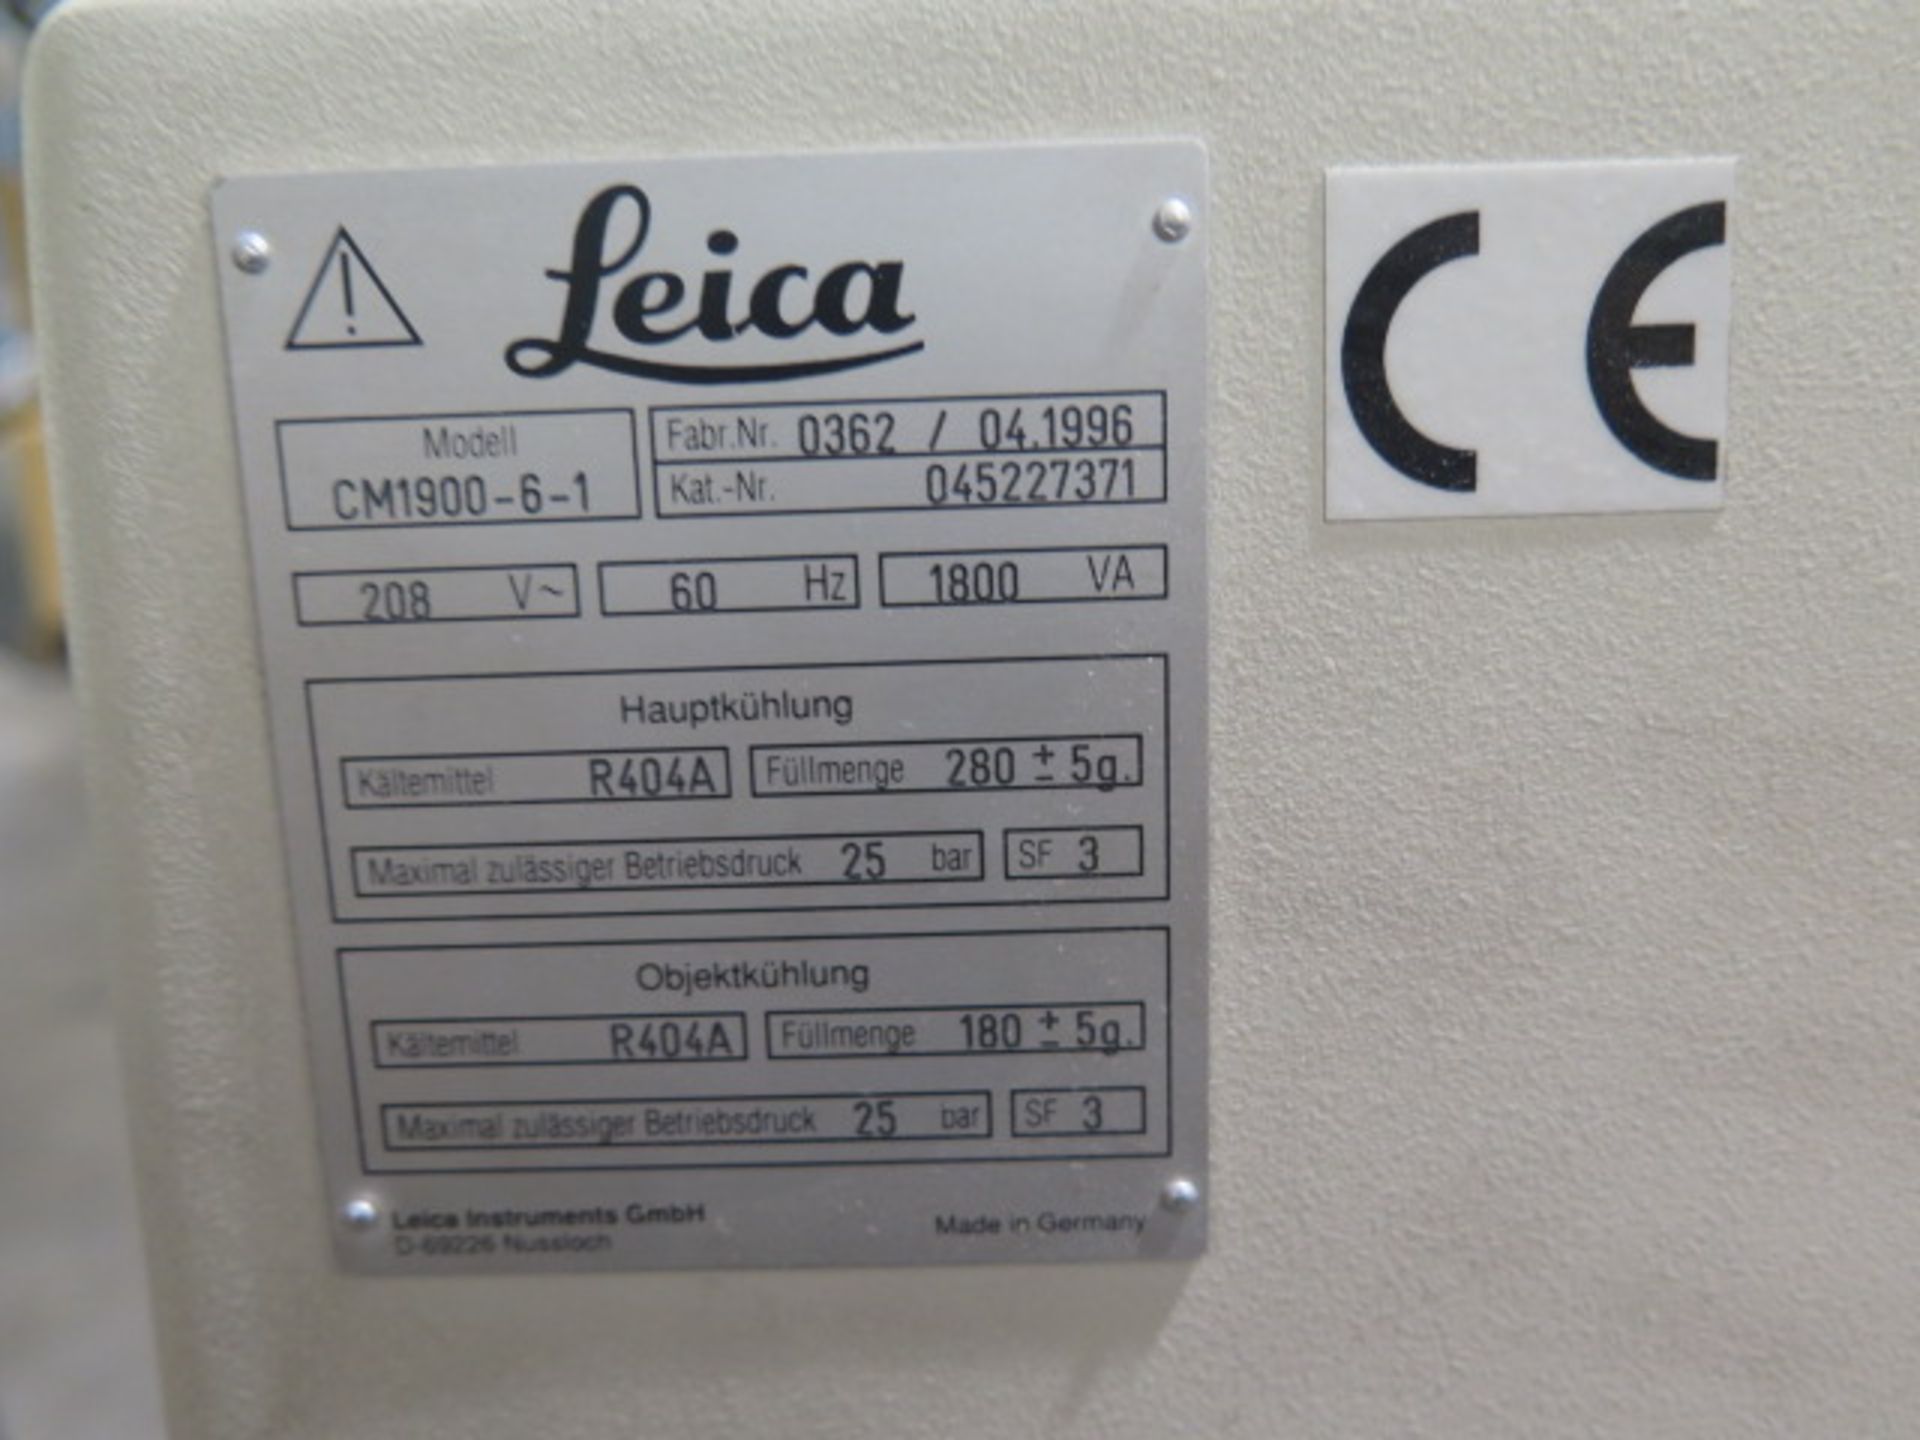 Leica CM1900-6-1 Refrigerated Microtome (SOLD AS-IS - NO WARRANTY) - Image 10 of 10